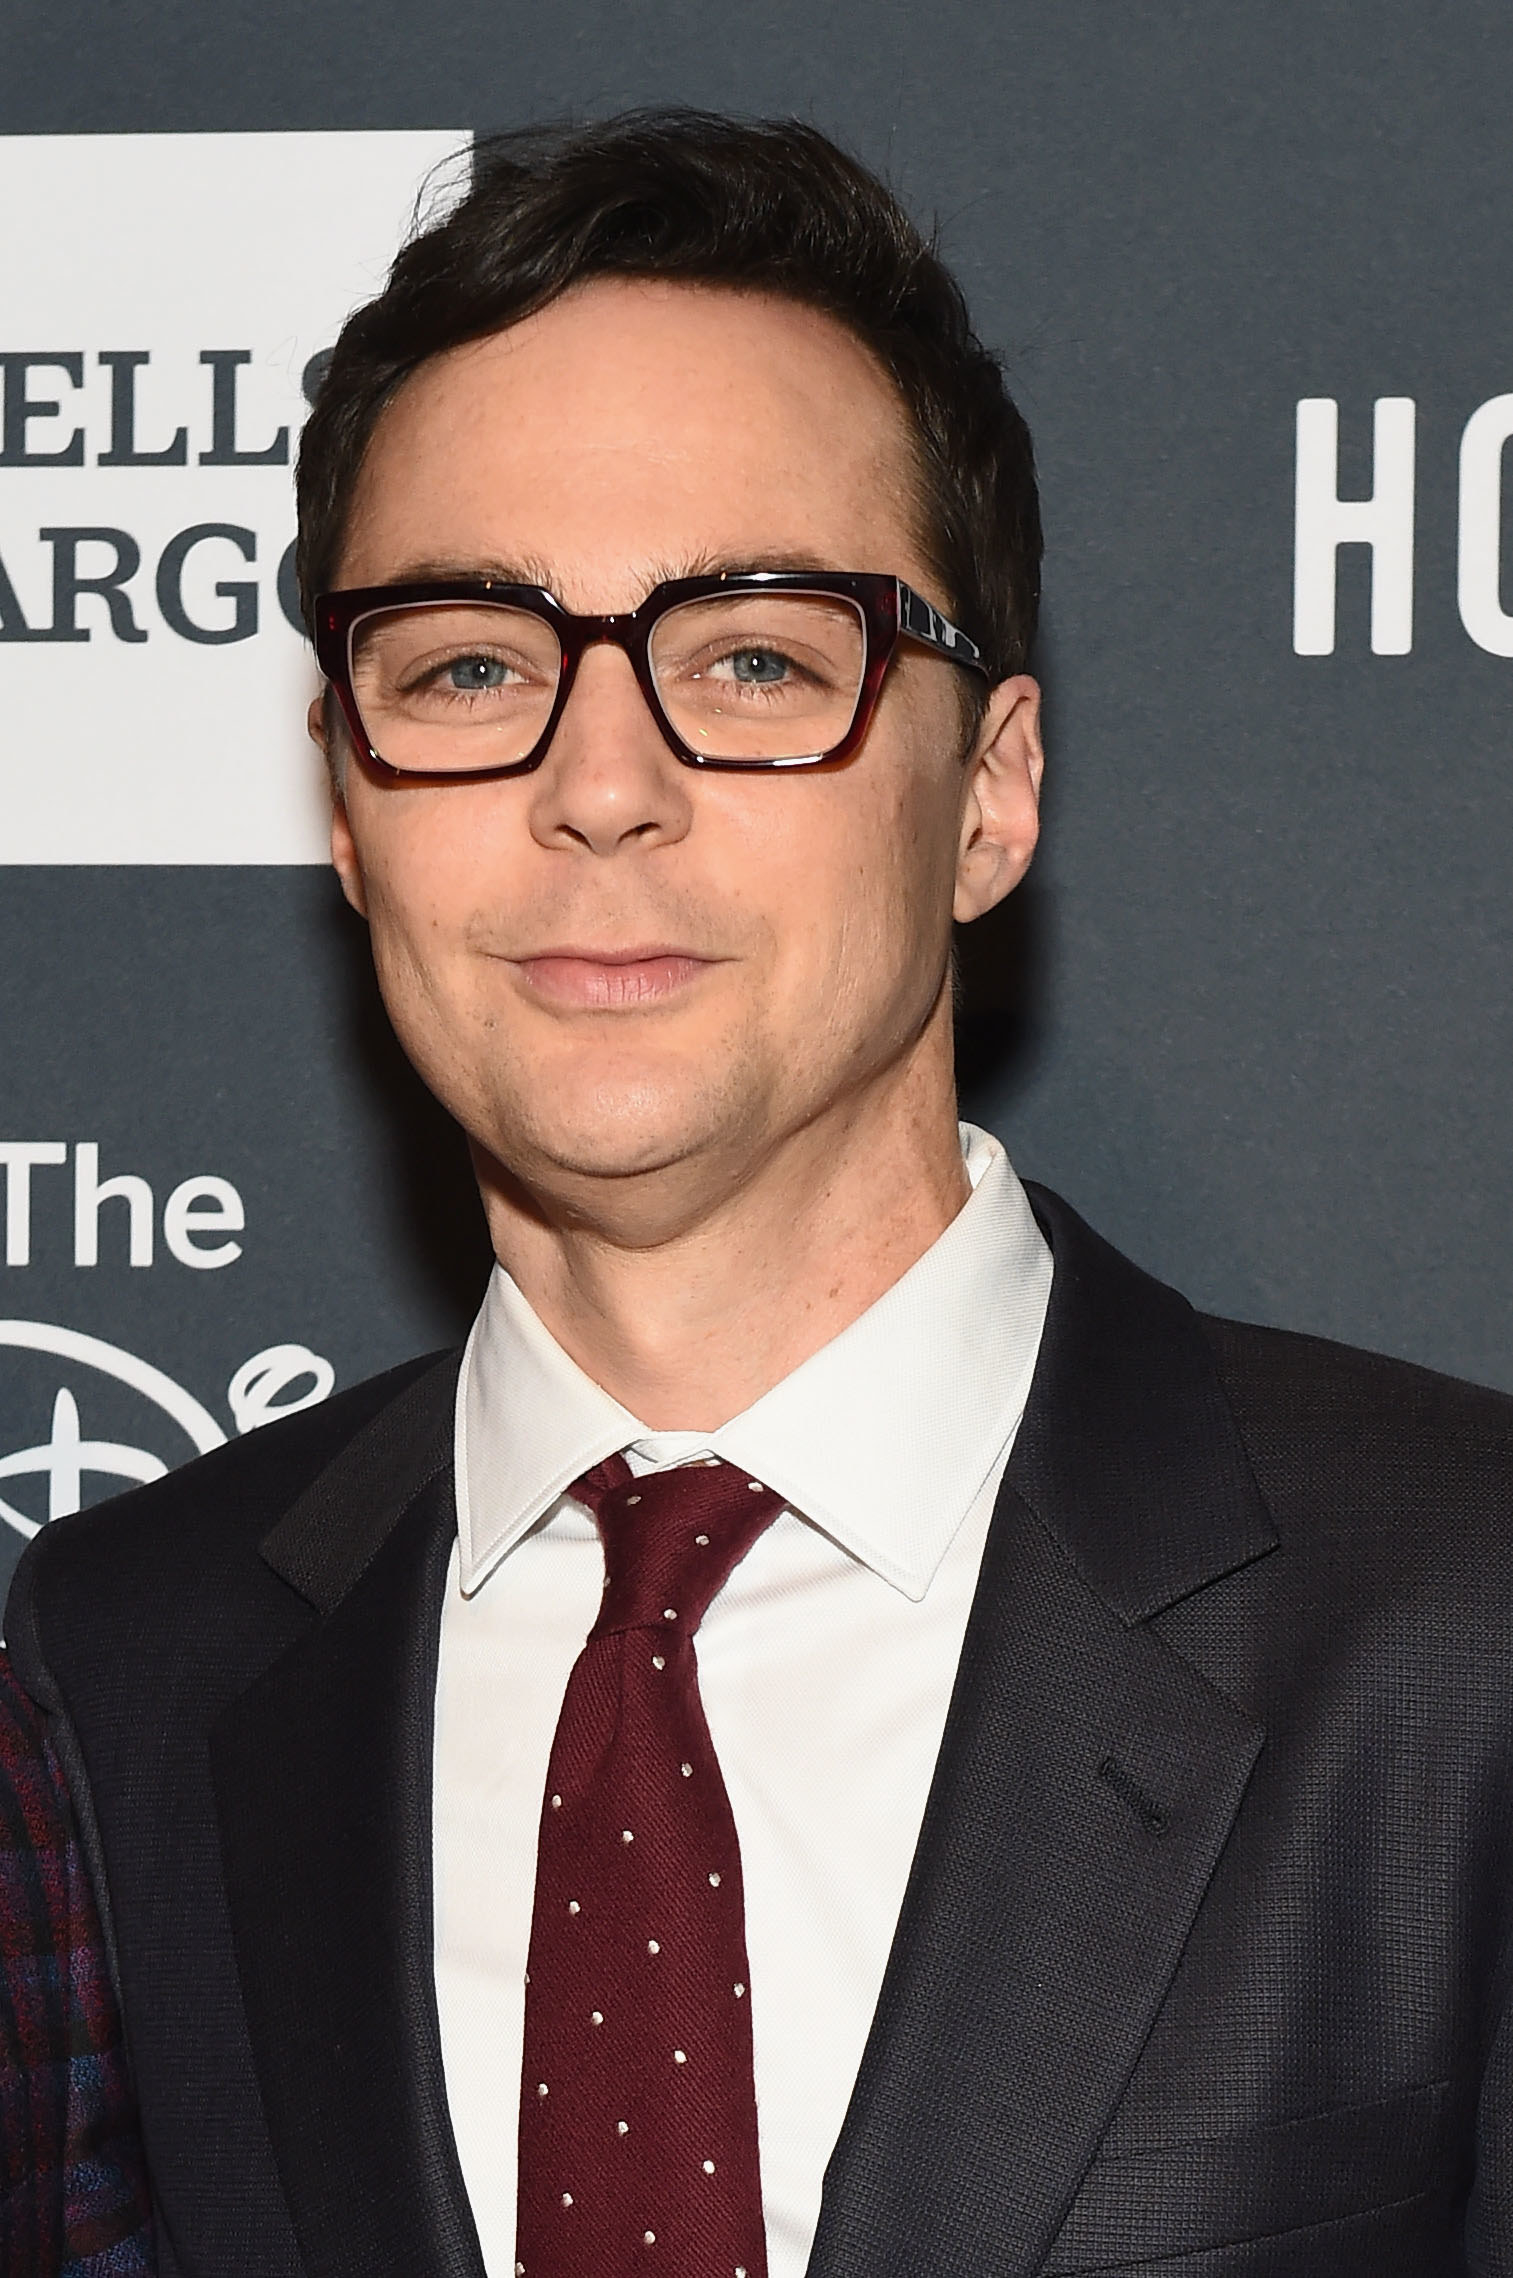 Clean-shaven Jim wearing glasses and in a suit and tie